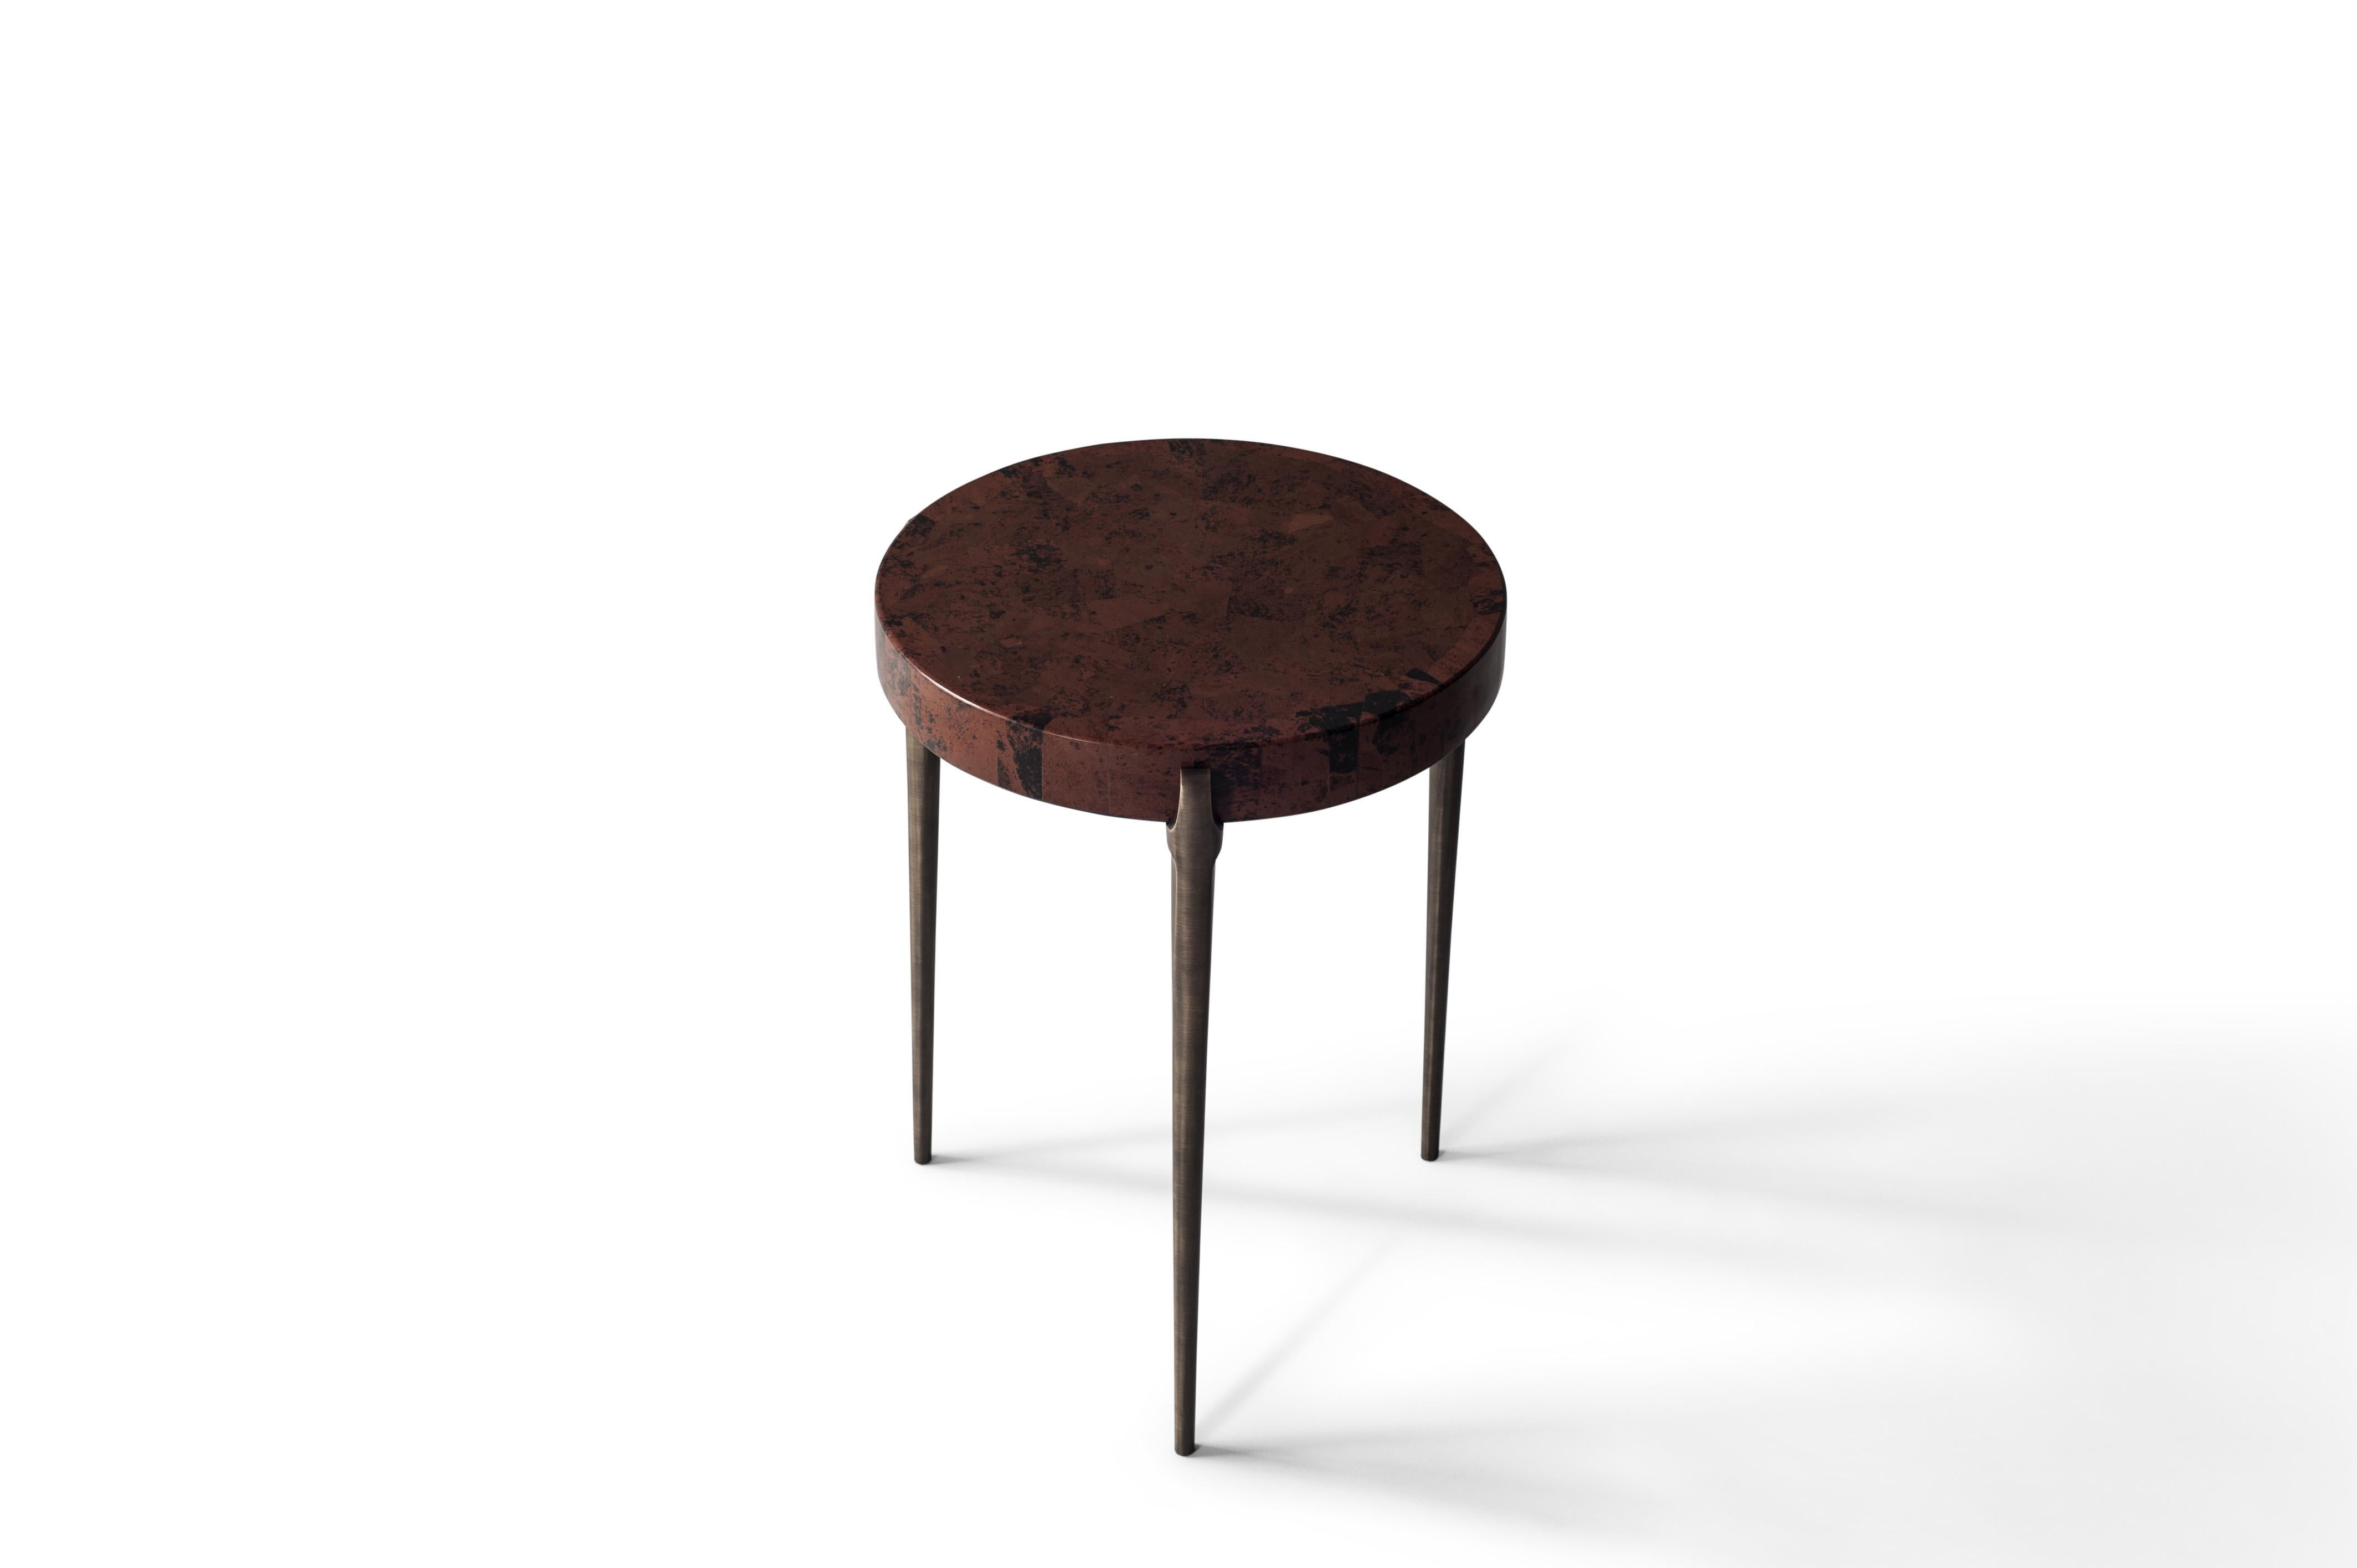 Acantha side table by DeMuro Das 
Dimensions: 41.5 x 55.1 cm
Materials: Marconi Jasper - Polished (Random)
 Solid Bronze (Antique) legs

Dimensions and finishes can be customized.

DeMuro Das is an international design firm and the aesthetic